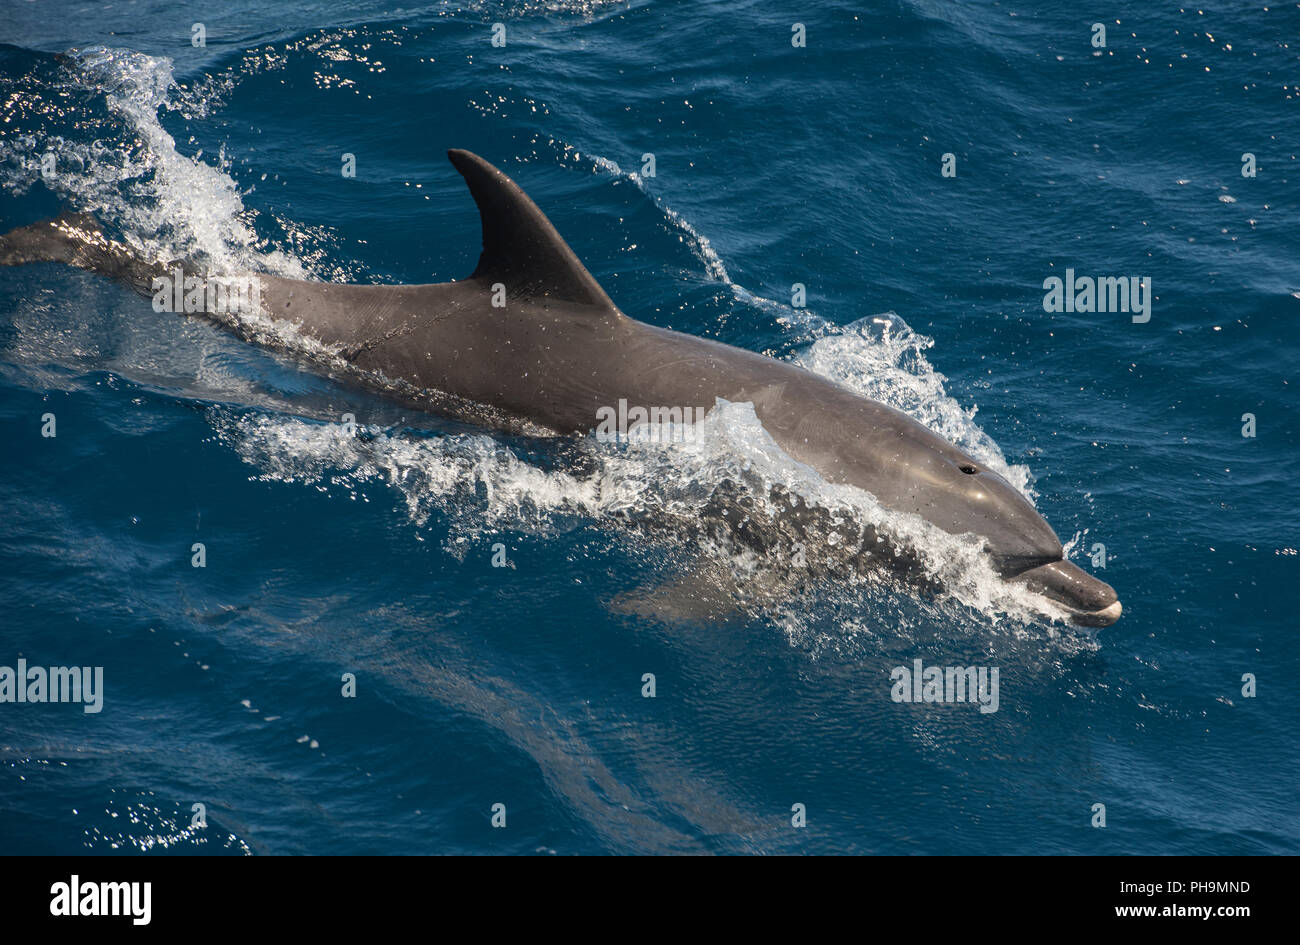 Bottlenose dolphin tursiops truncatus surfing waves swimming and breaching on surface of open sea ocean Stock Photo